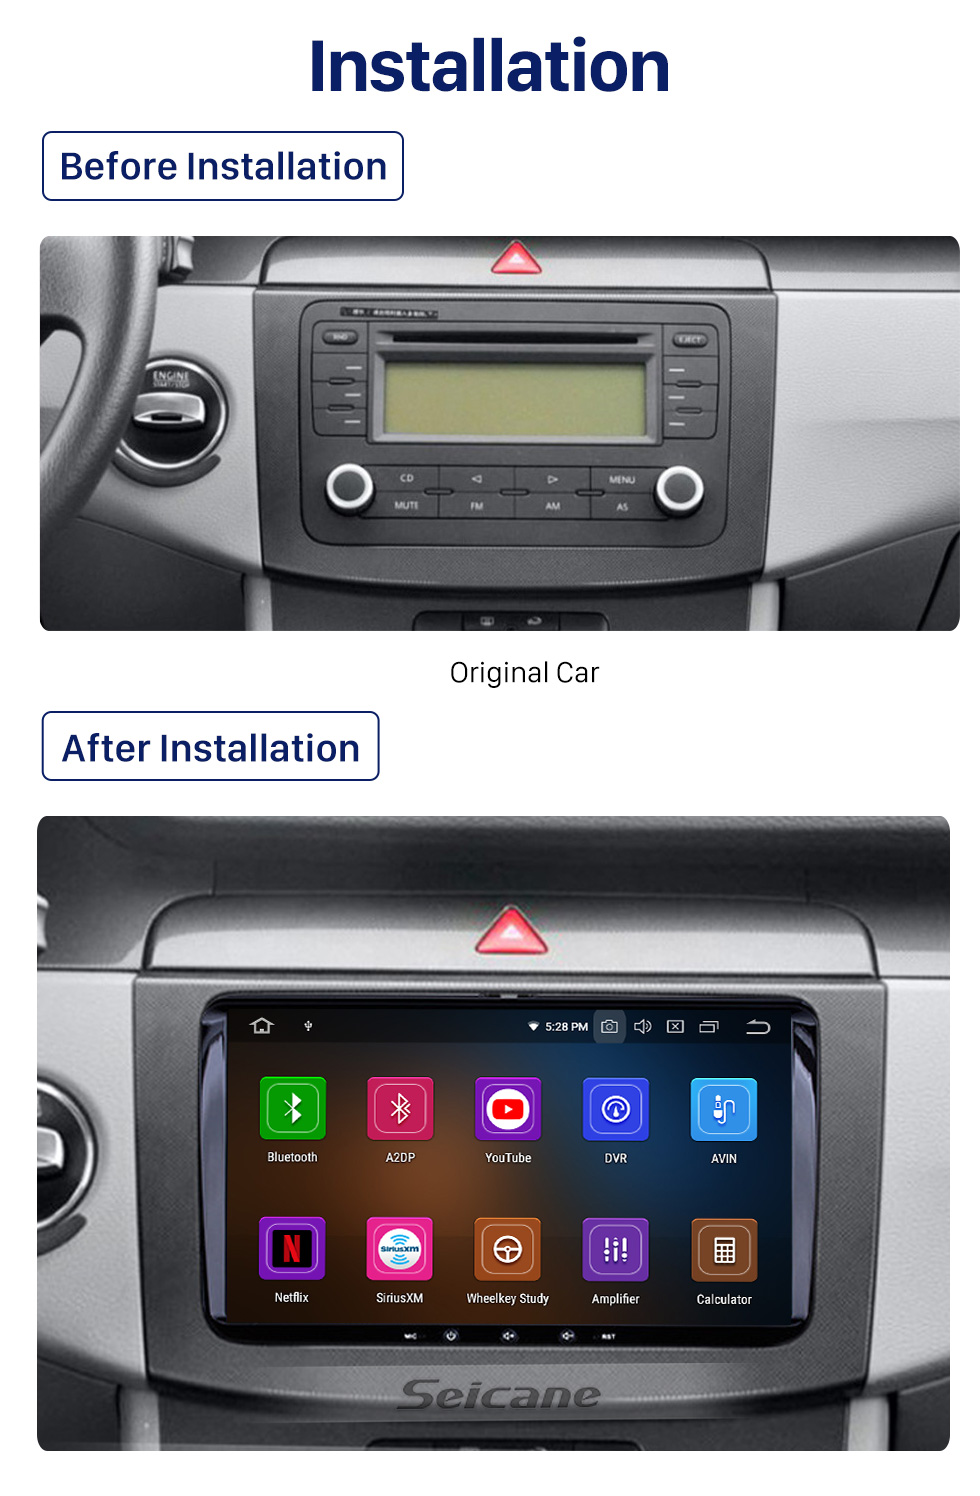 Seicane 9 inch 2 din HD Touchscreen Android 10.0 Radio Stereo GPS navigation system for VW Volkswagen Universal SKODA Seat with USB OBD2 Bluetooth music Wifi 